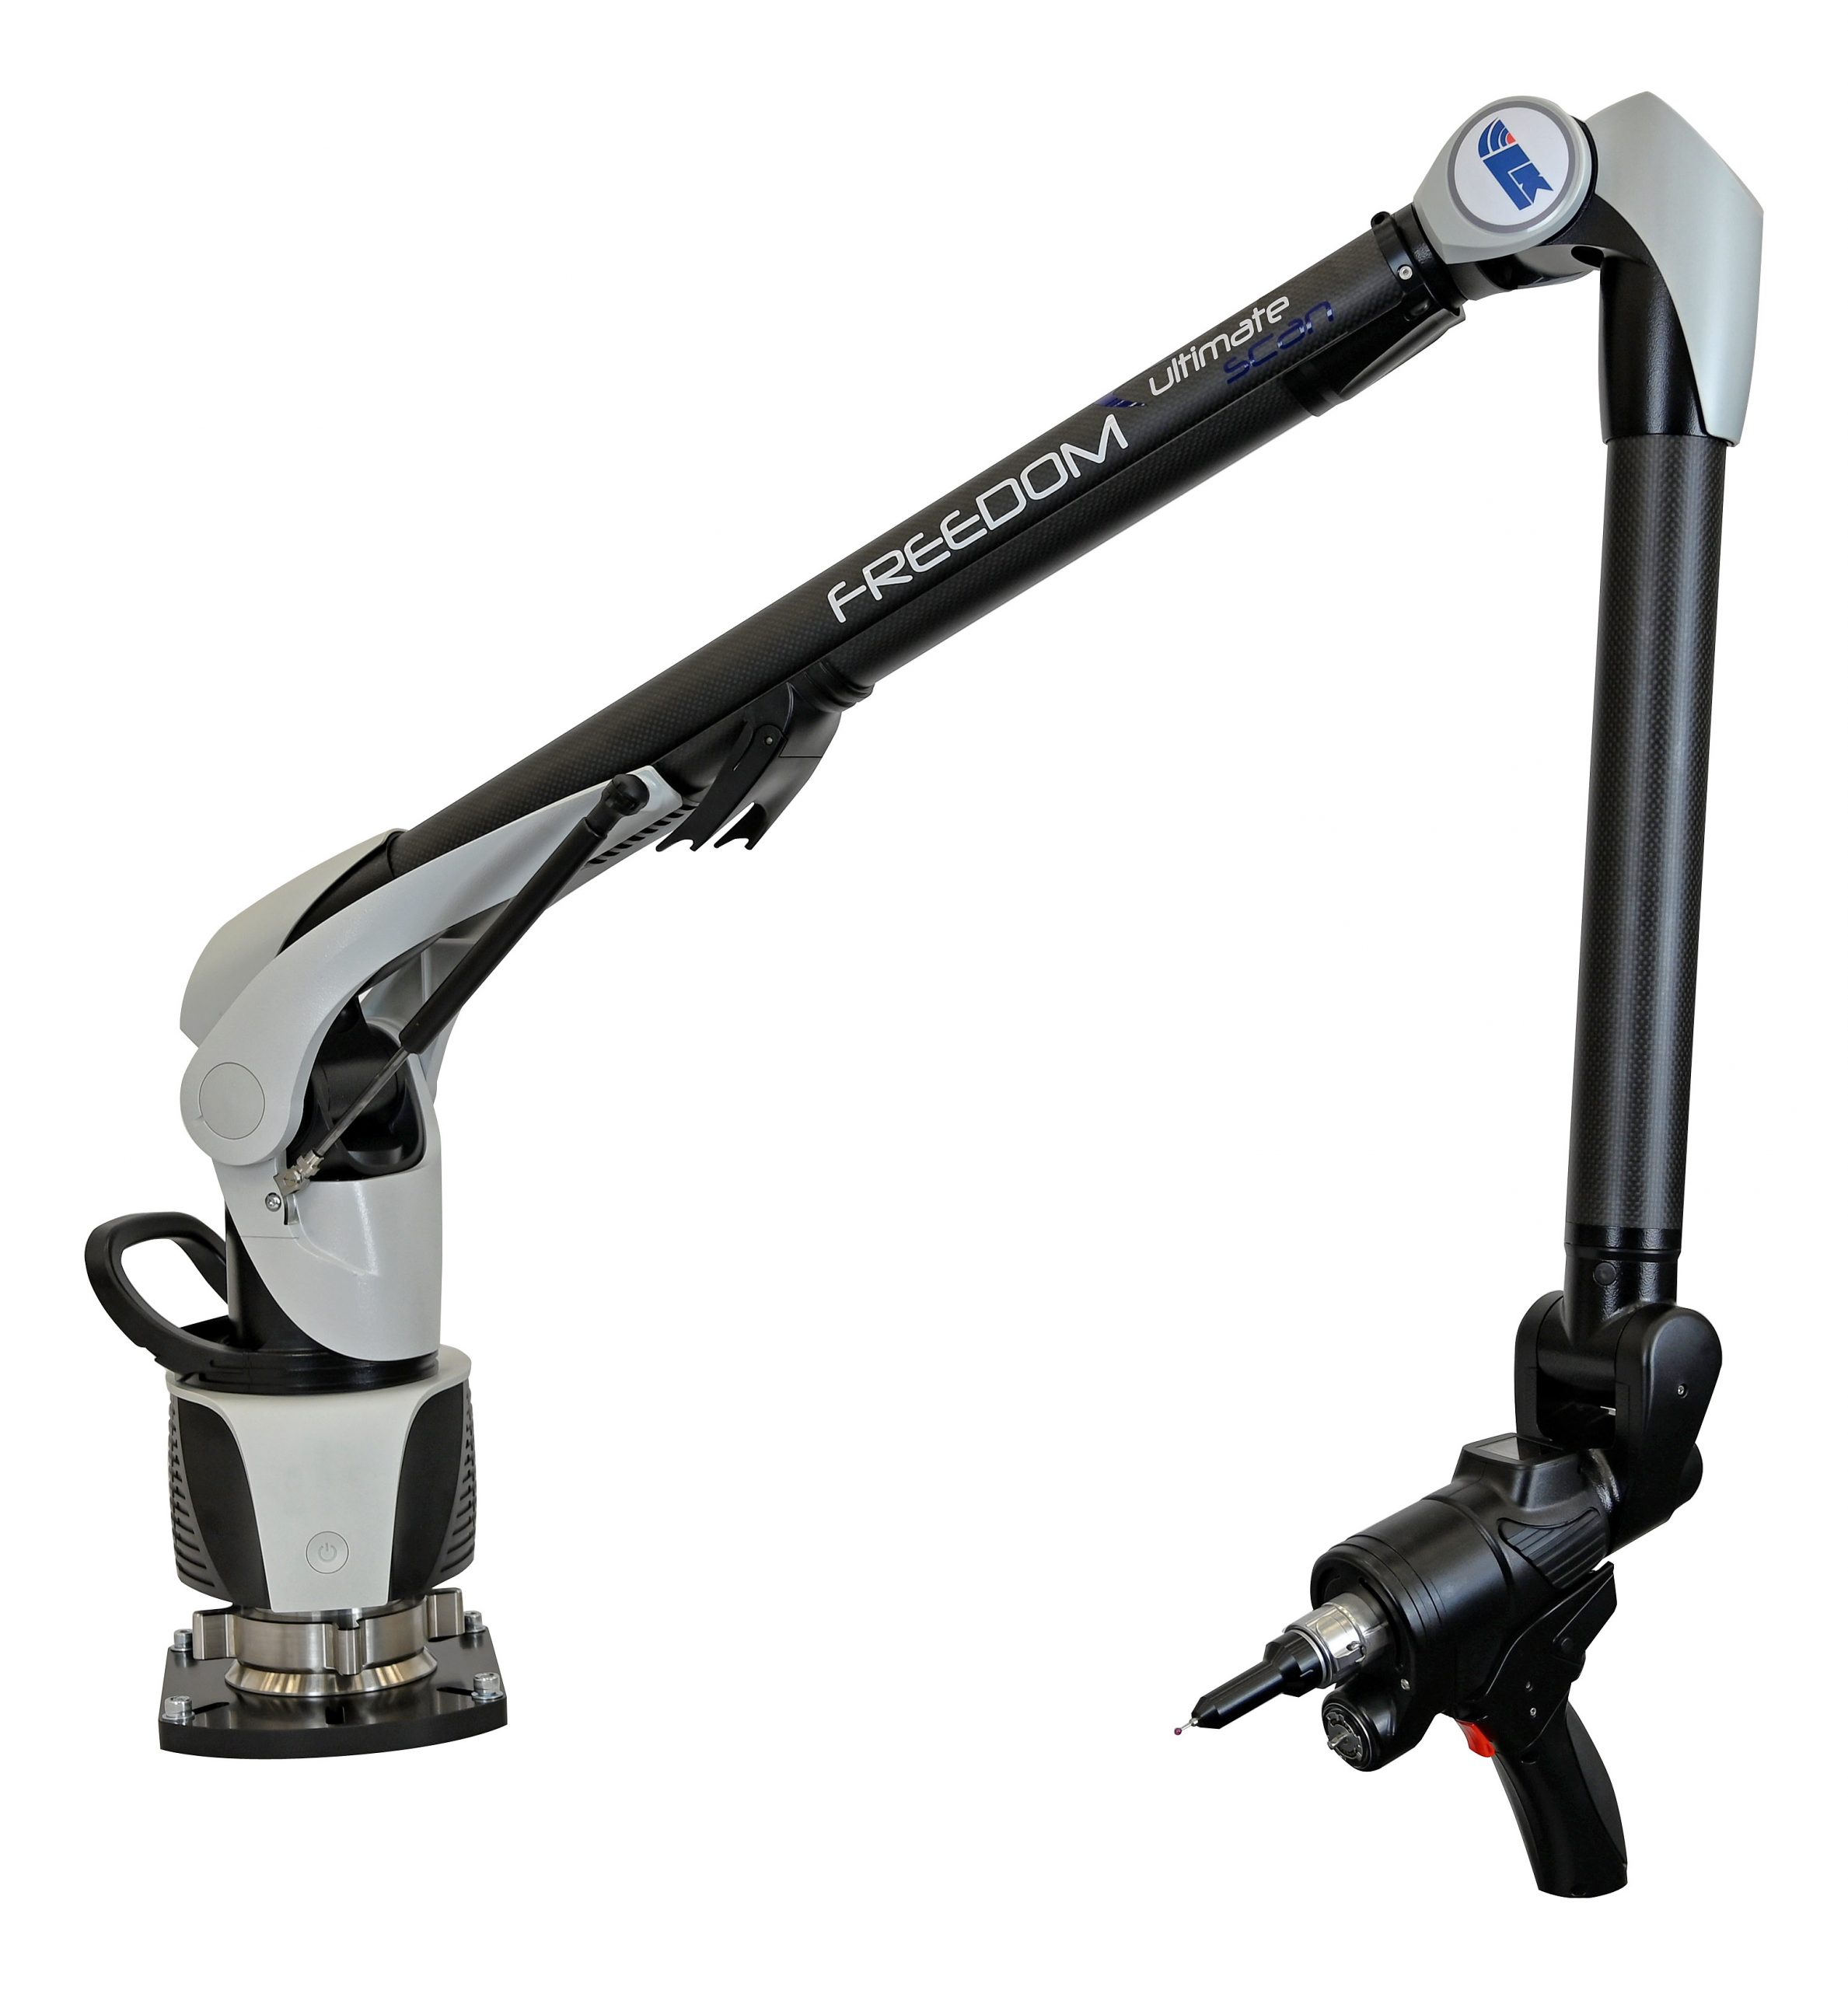 An ultra-accuracy 7-axis FREEDOM ULTIMATE SCAN portable measuring arm from LK Metrology. Photo via LK Metrology.